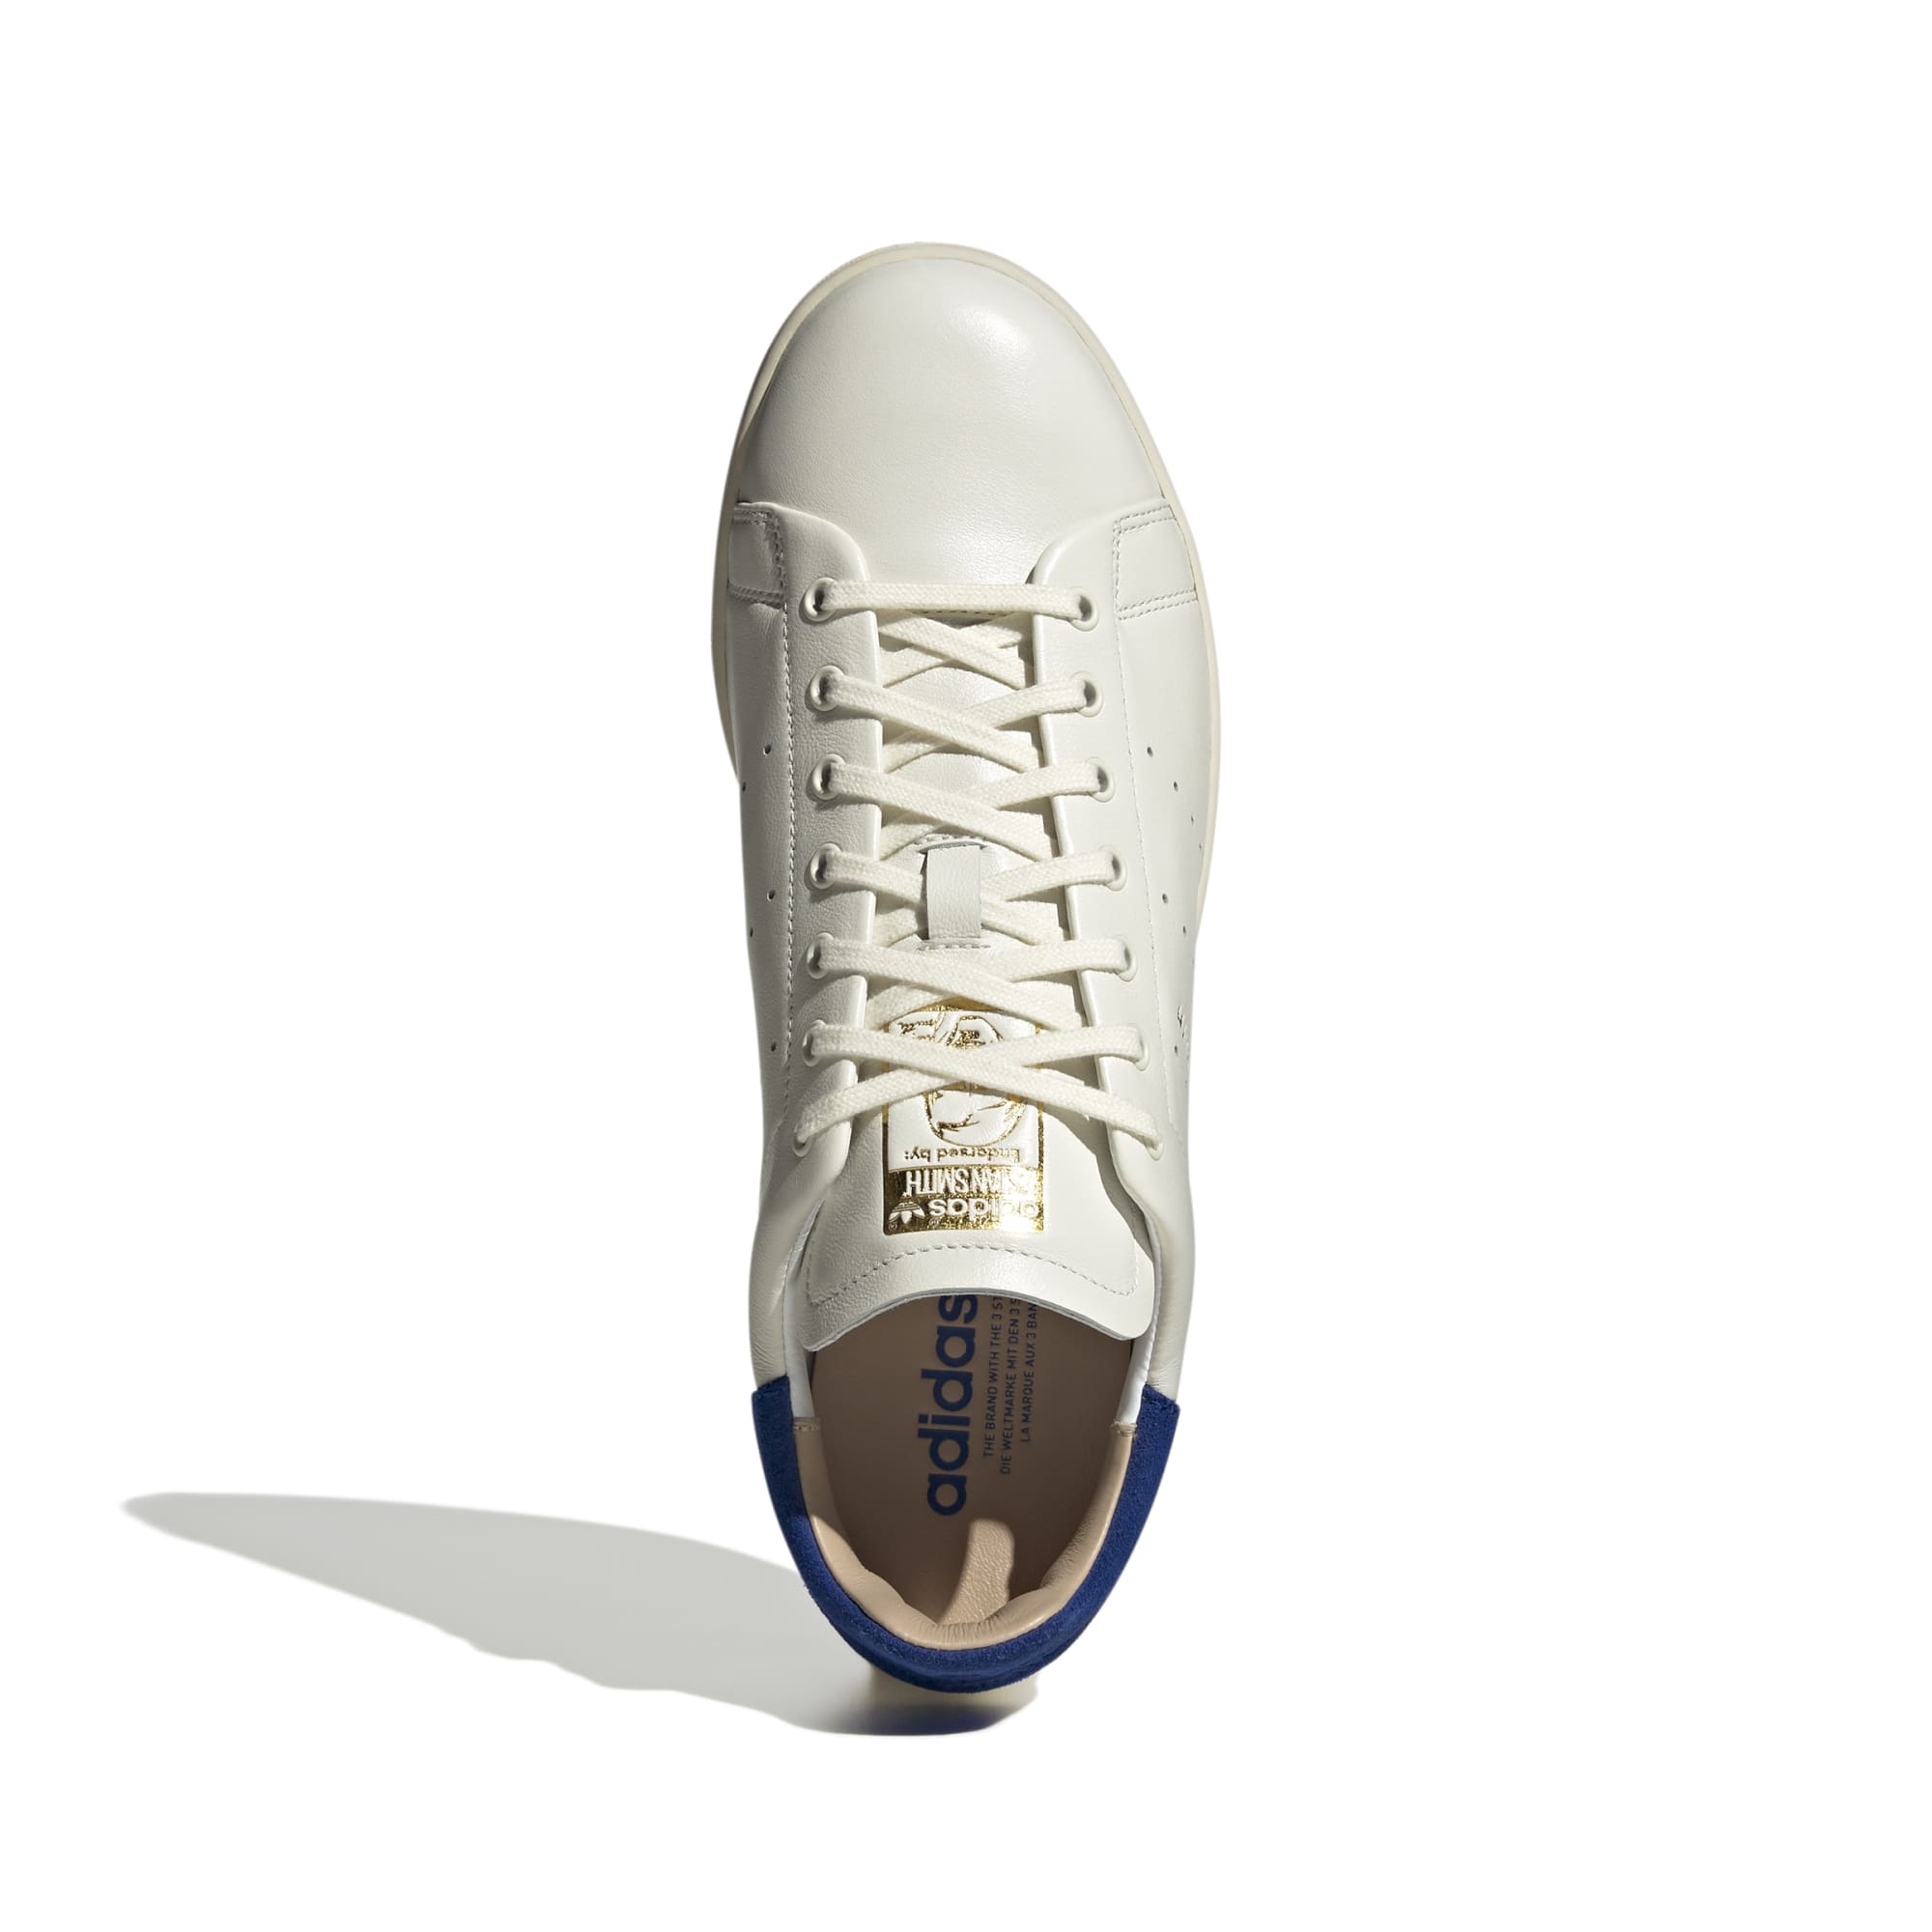 ADIDAS STAN SMITH LUX ID1995 SNEAKER (M)